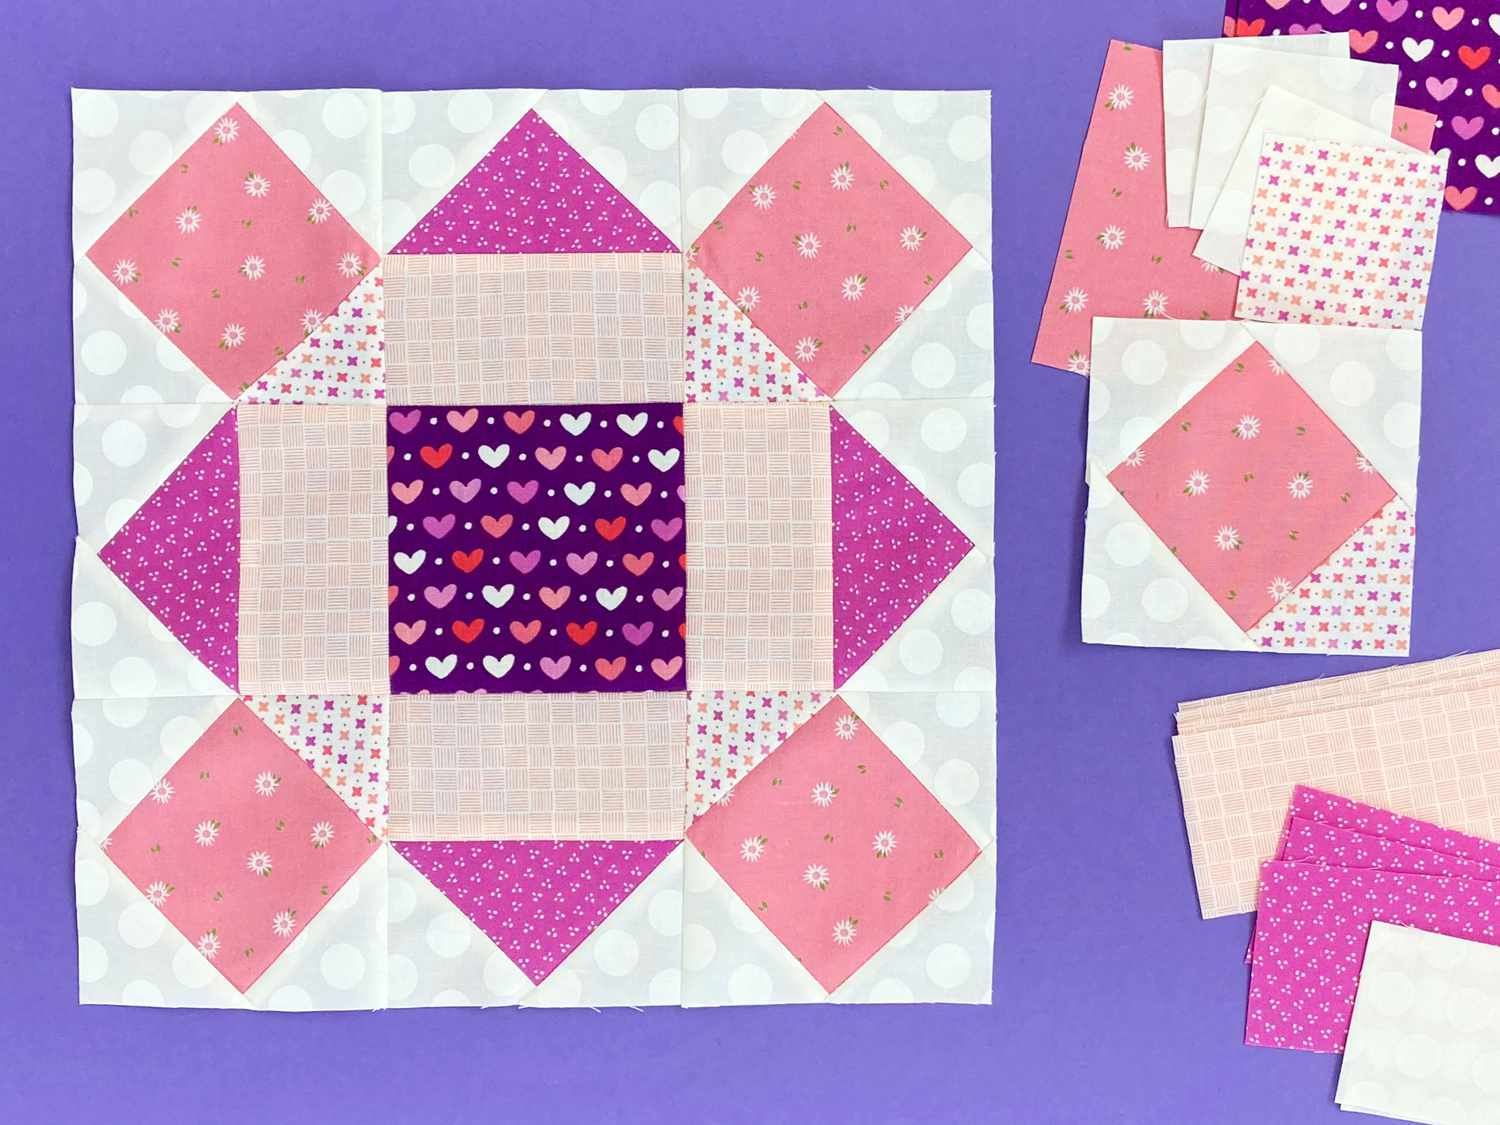 Block 9 made with purple, coral, and pink hearts fabric